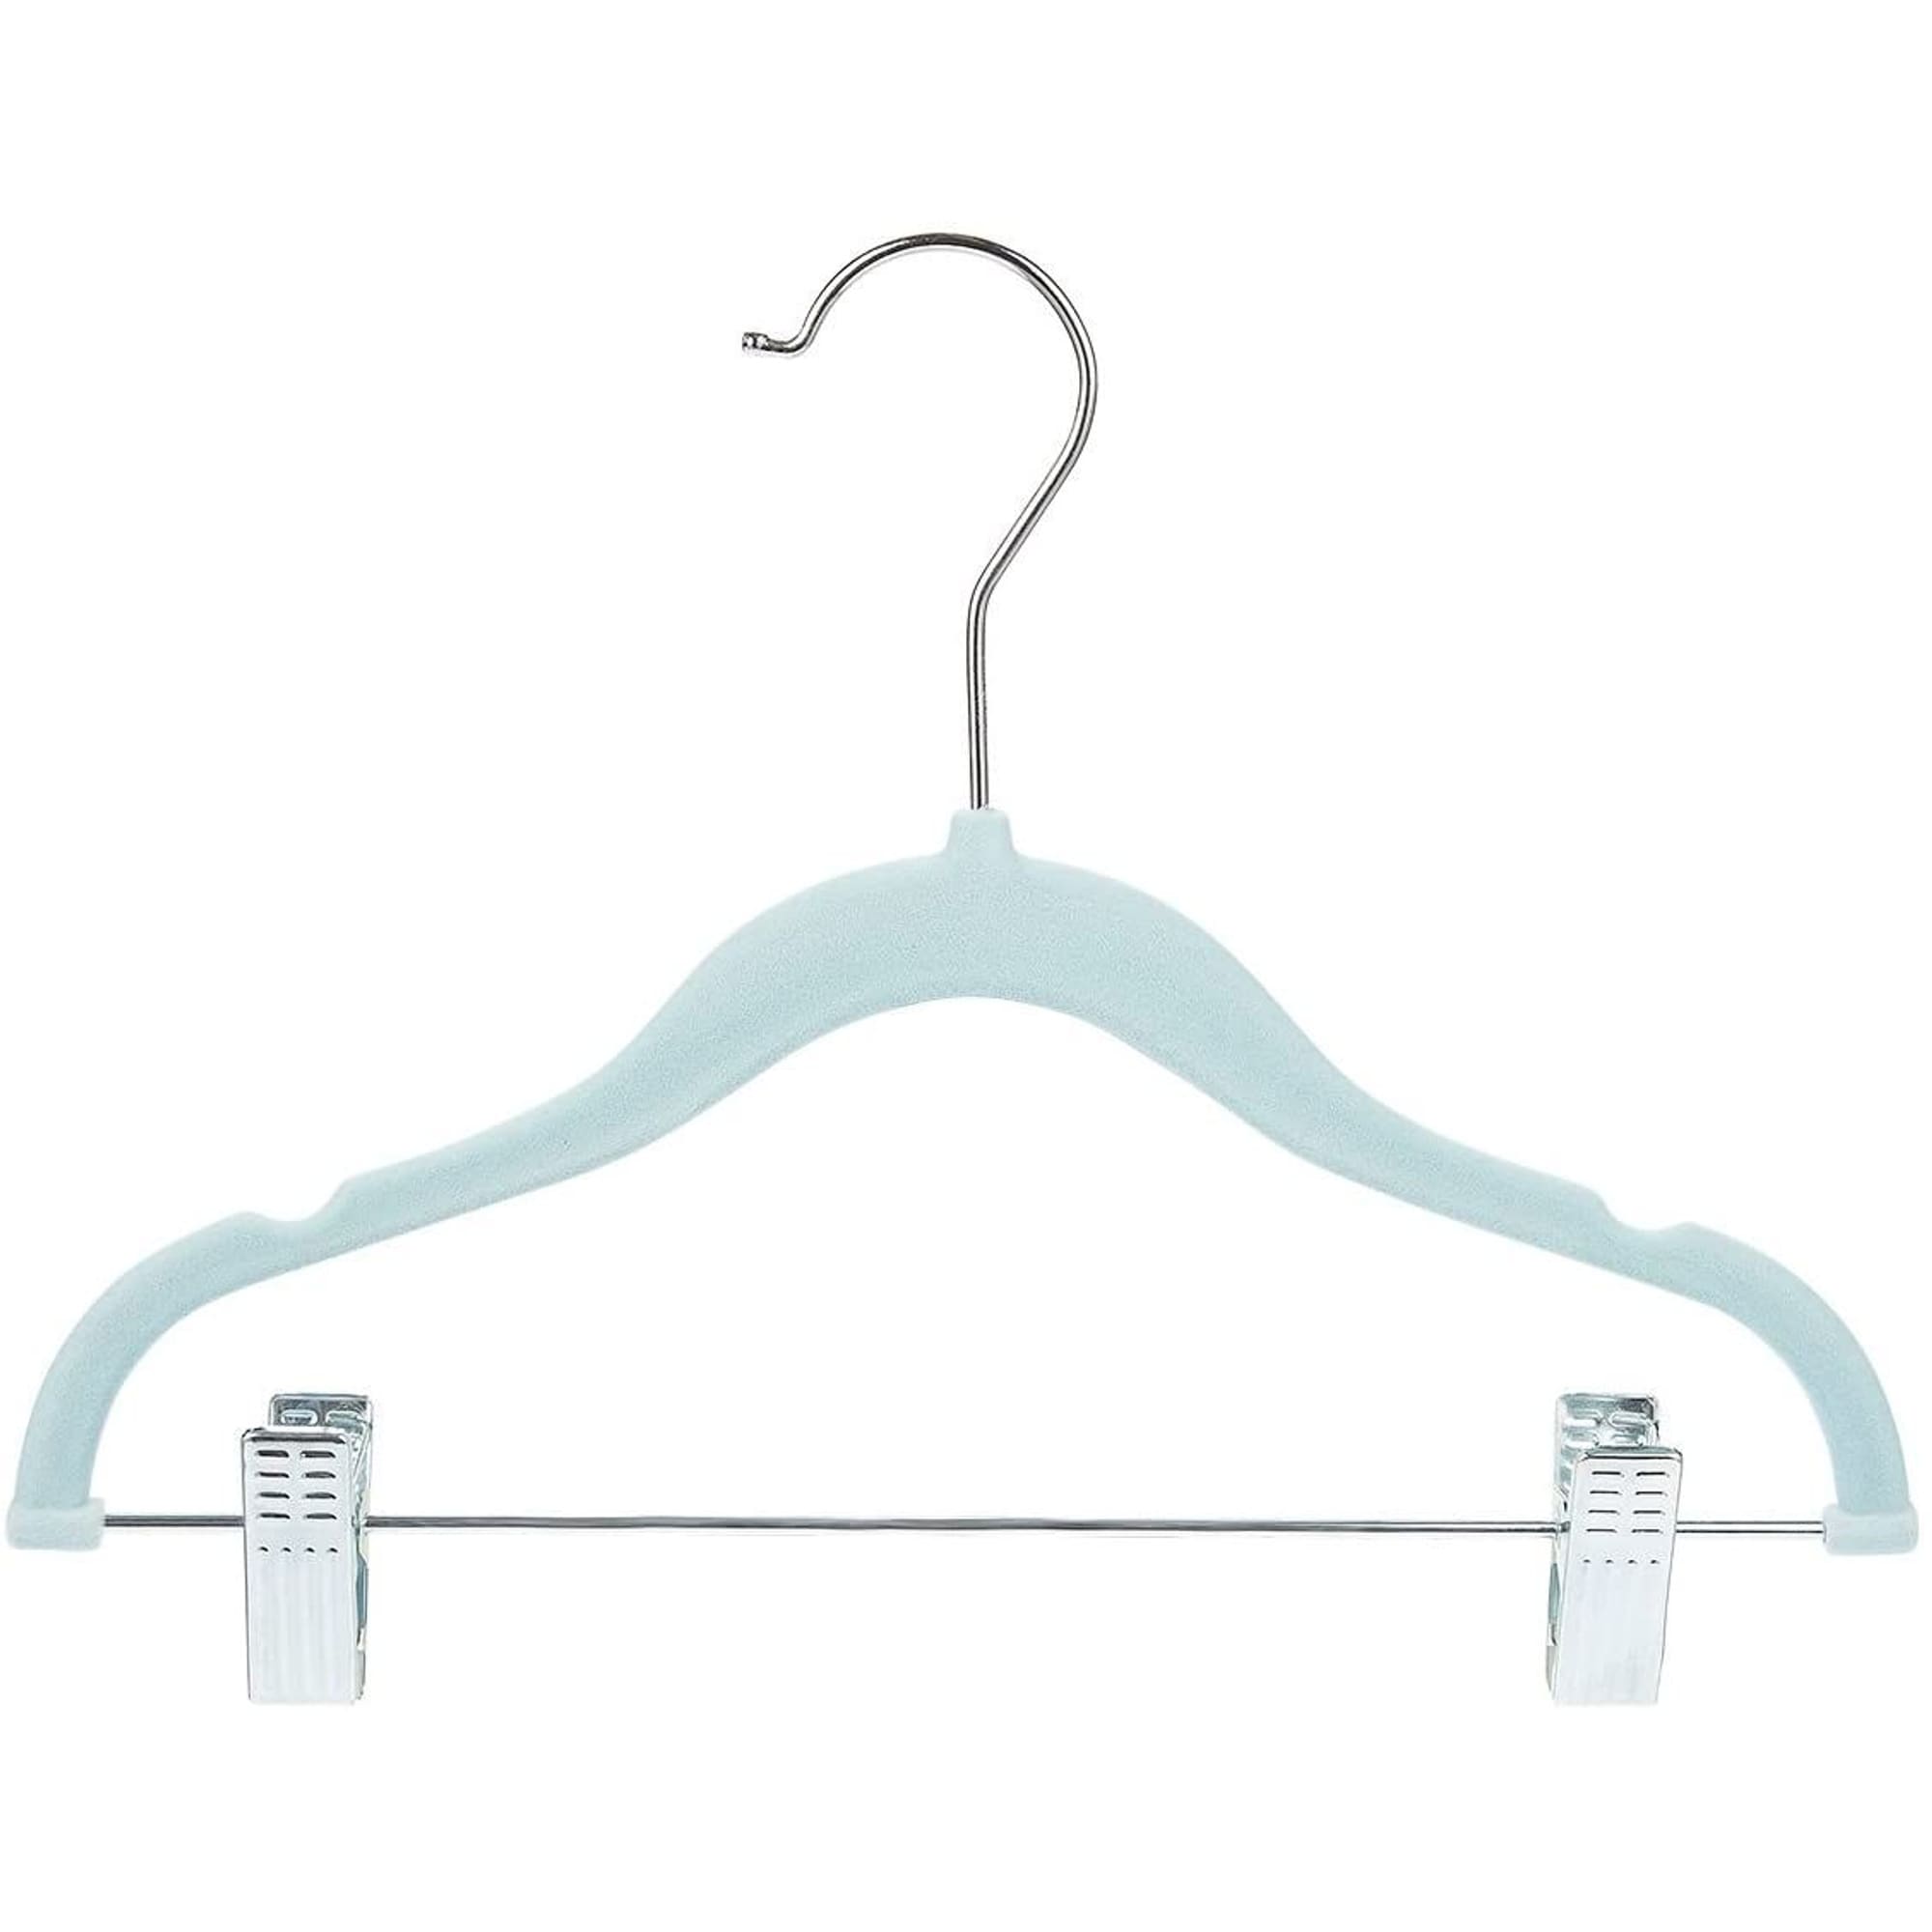 https://ak1.ostkcdn.com/images/products/is/images/direct/fe9c29f9caaa94a9e9c1696c61618d1c16067d63/Blue-Velvet-Clothes-Hangers-with-Clips-for-Baby-Nursery-and-Kids-Closet%2C-Ultra-Thin%2C-Nonslip-%2812-Inches%2C-24-Pack%29.jpg